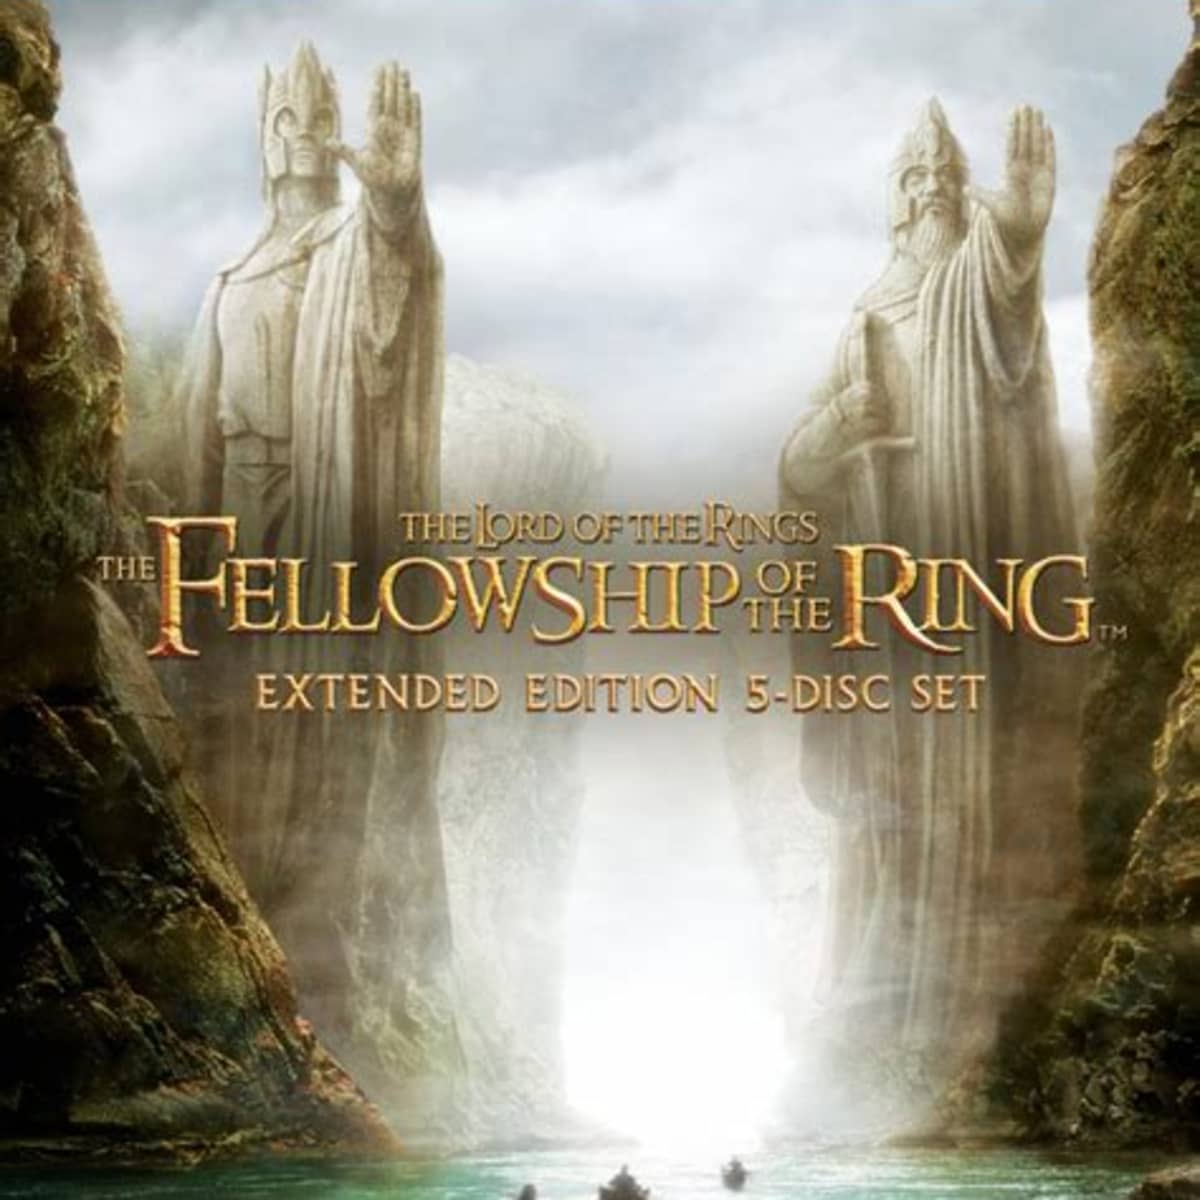 Regal - All 3 Lord of the Rings (extended editions) are